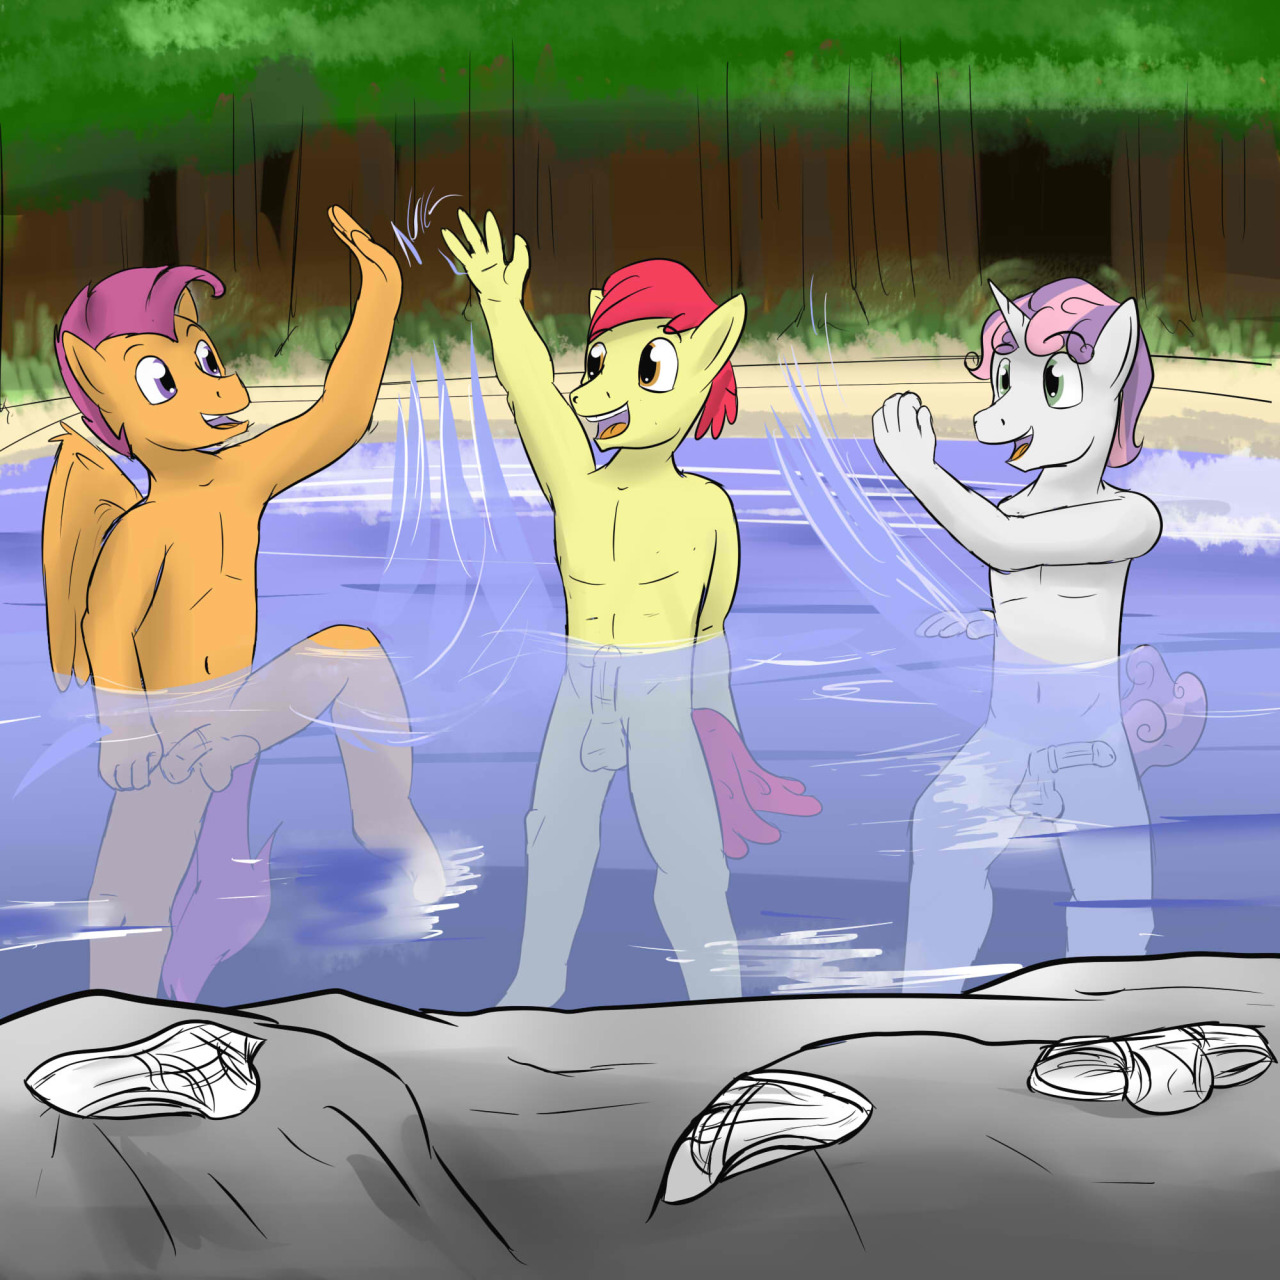 After a day of unsuccessful cutie mark schemes, the CMC colts like to go skinny dipping